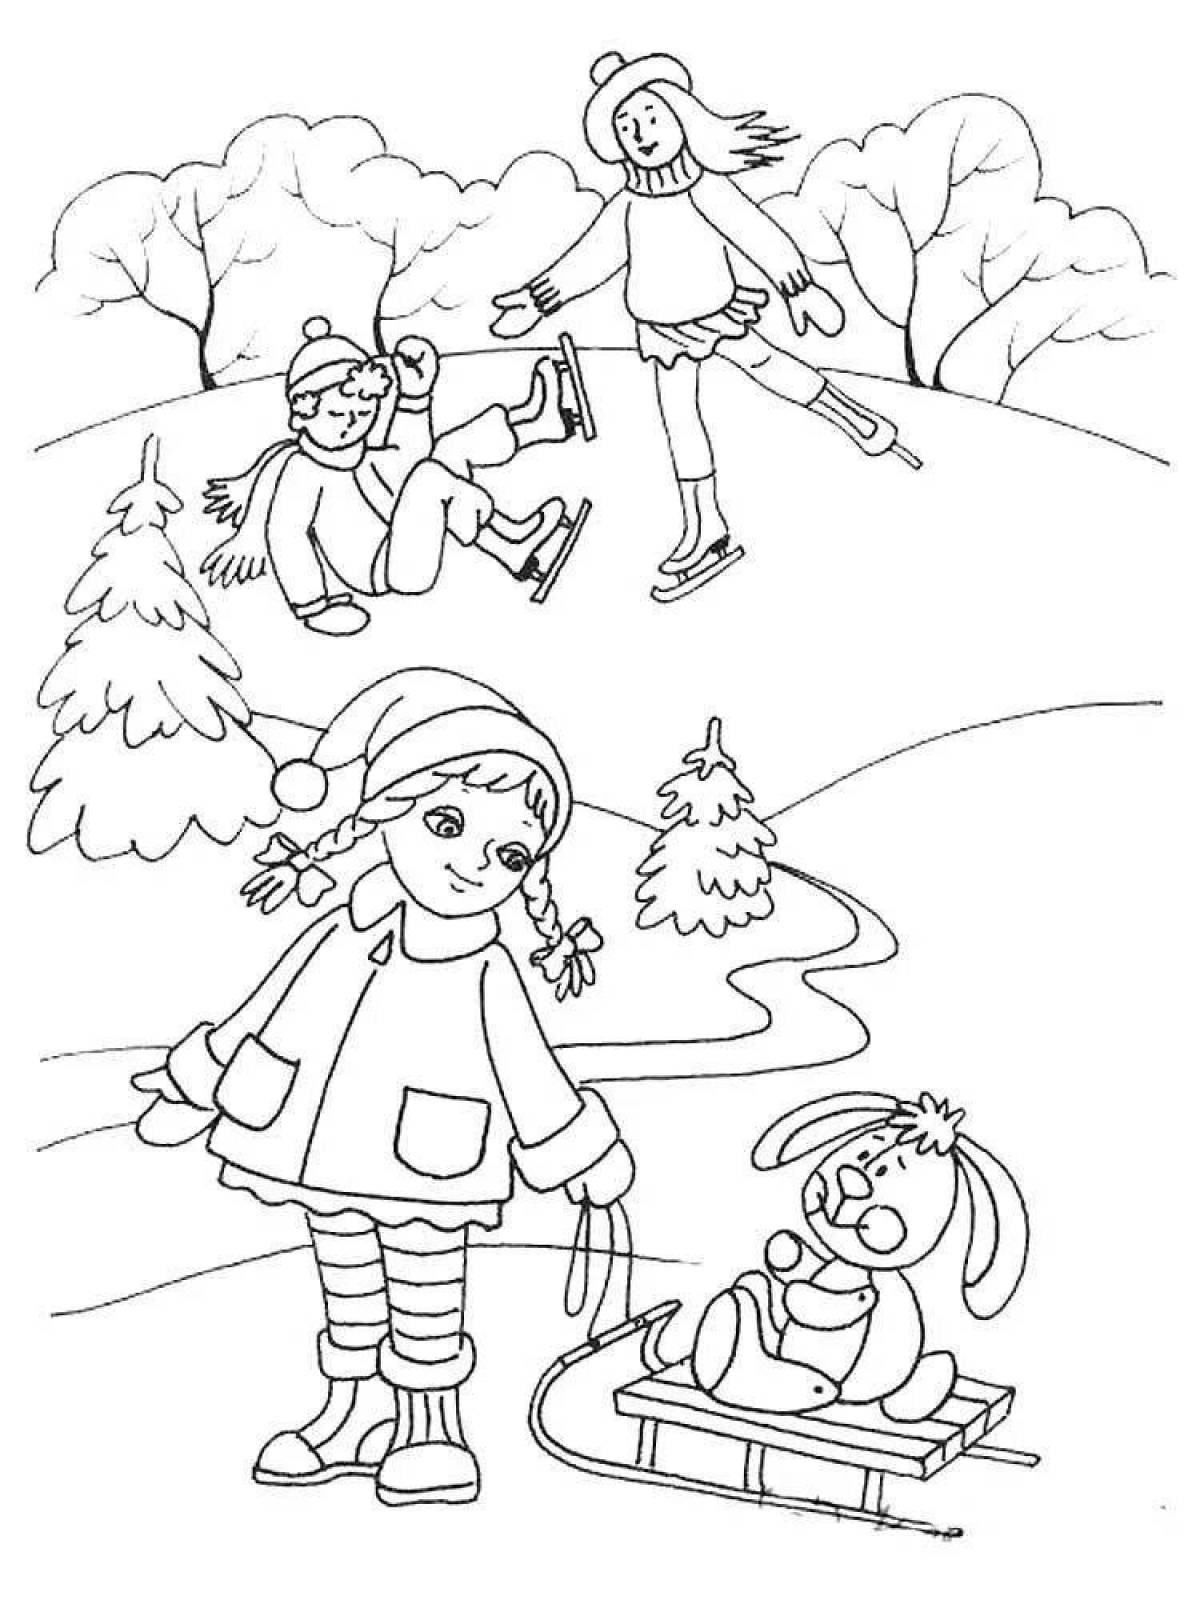 Coloring page charming kitty